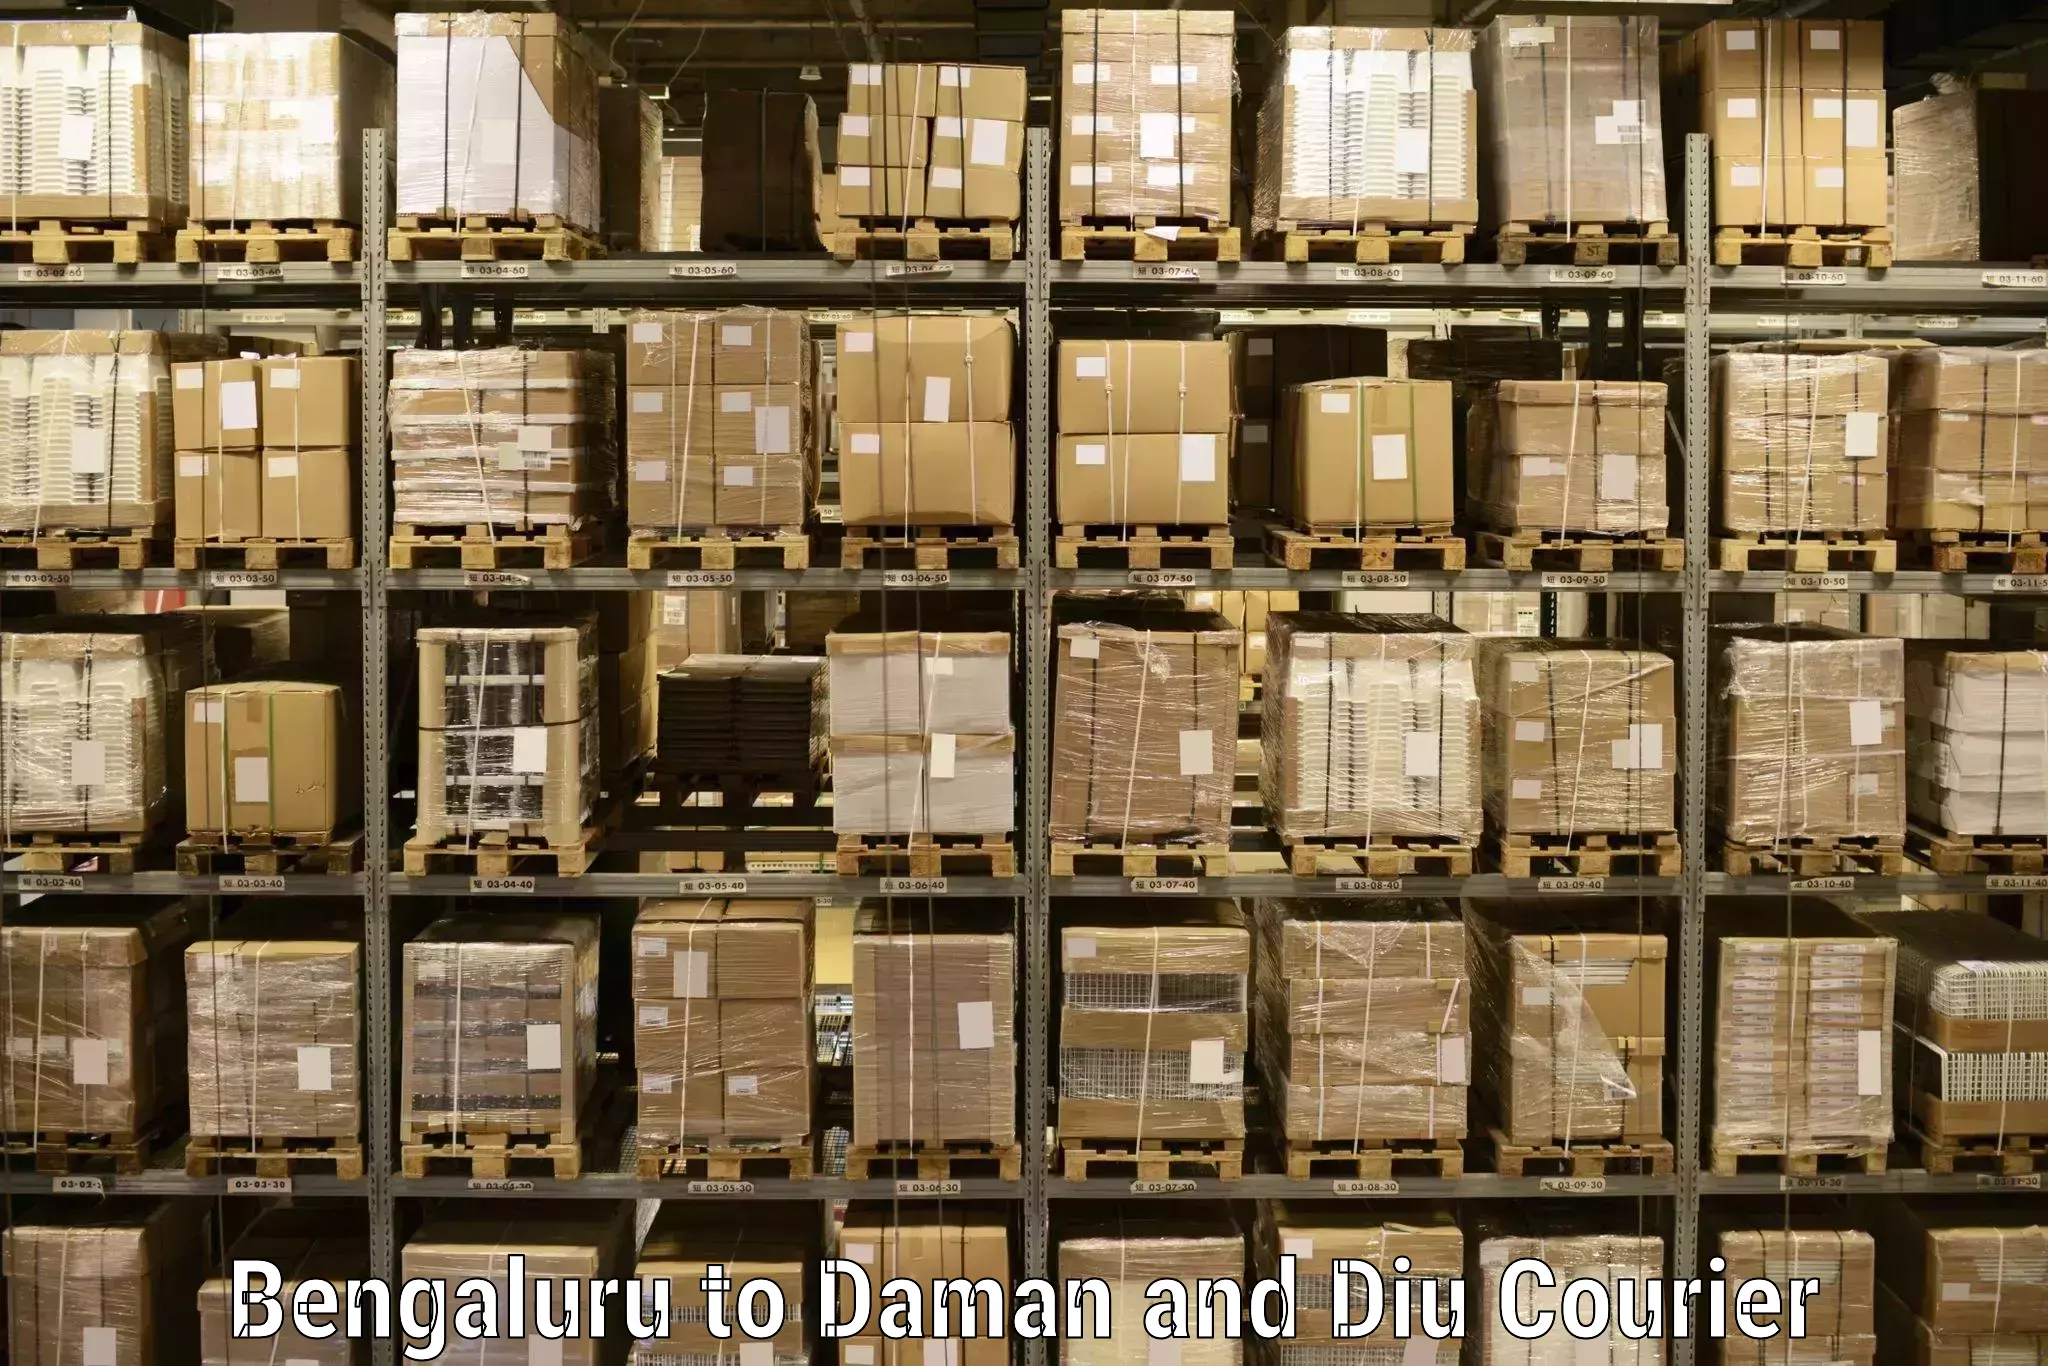 Flexible delivery schedules Bengaluru to Daman and Diu